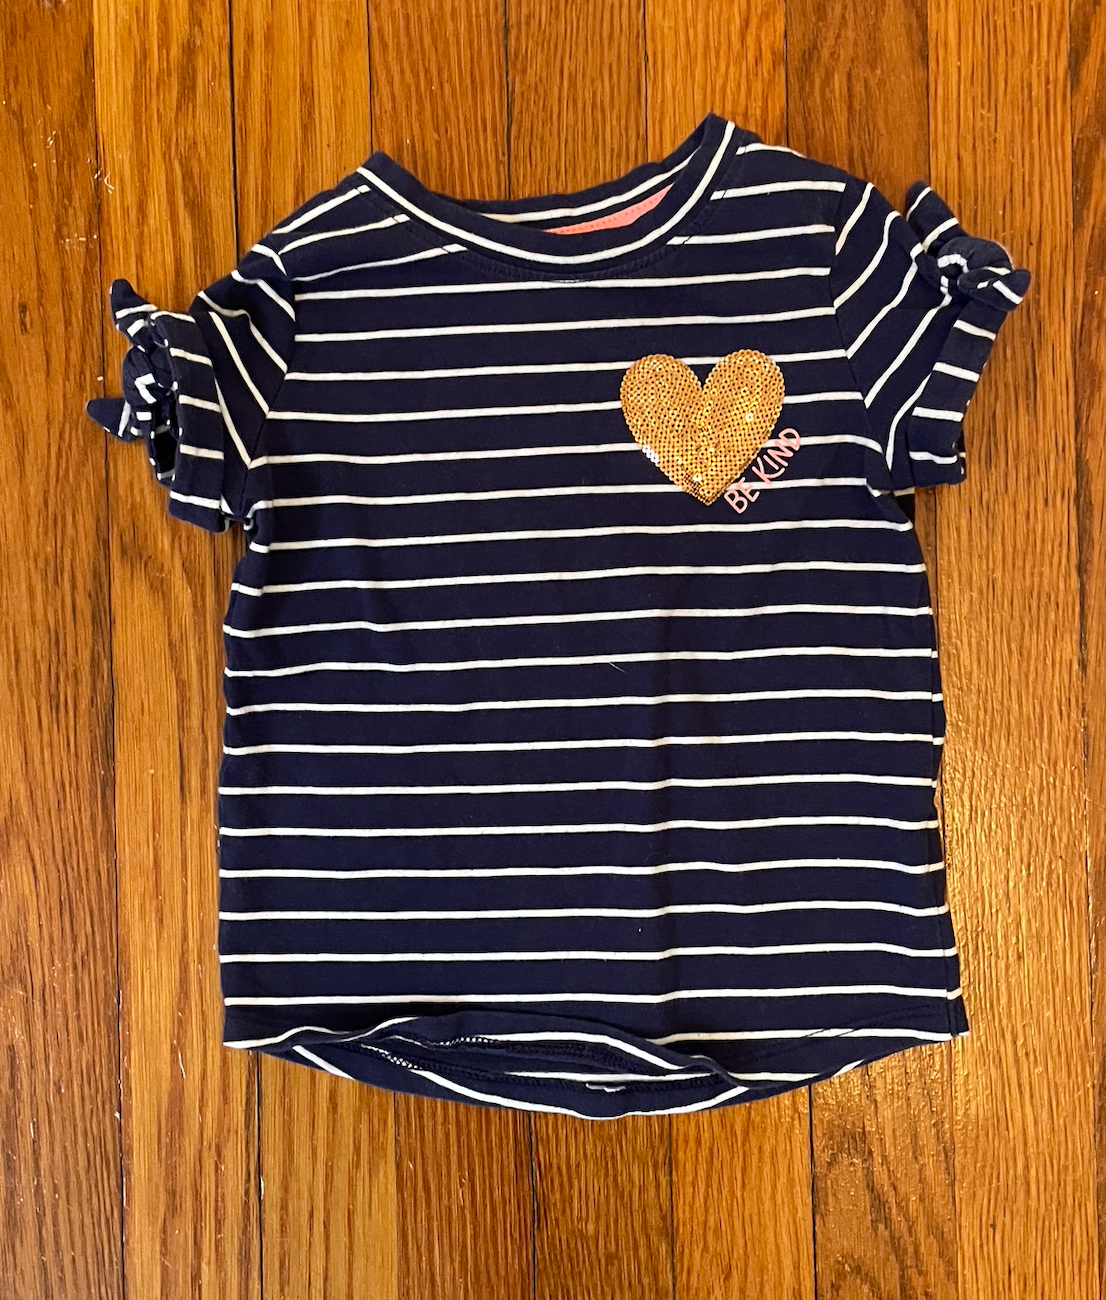 Cat and Jack 2T girls shirt - blue striped with a gold sequin heart - EUC